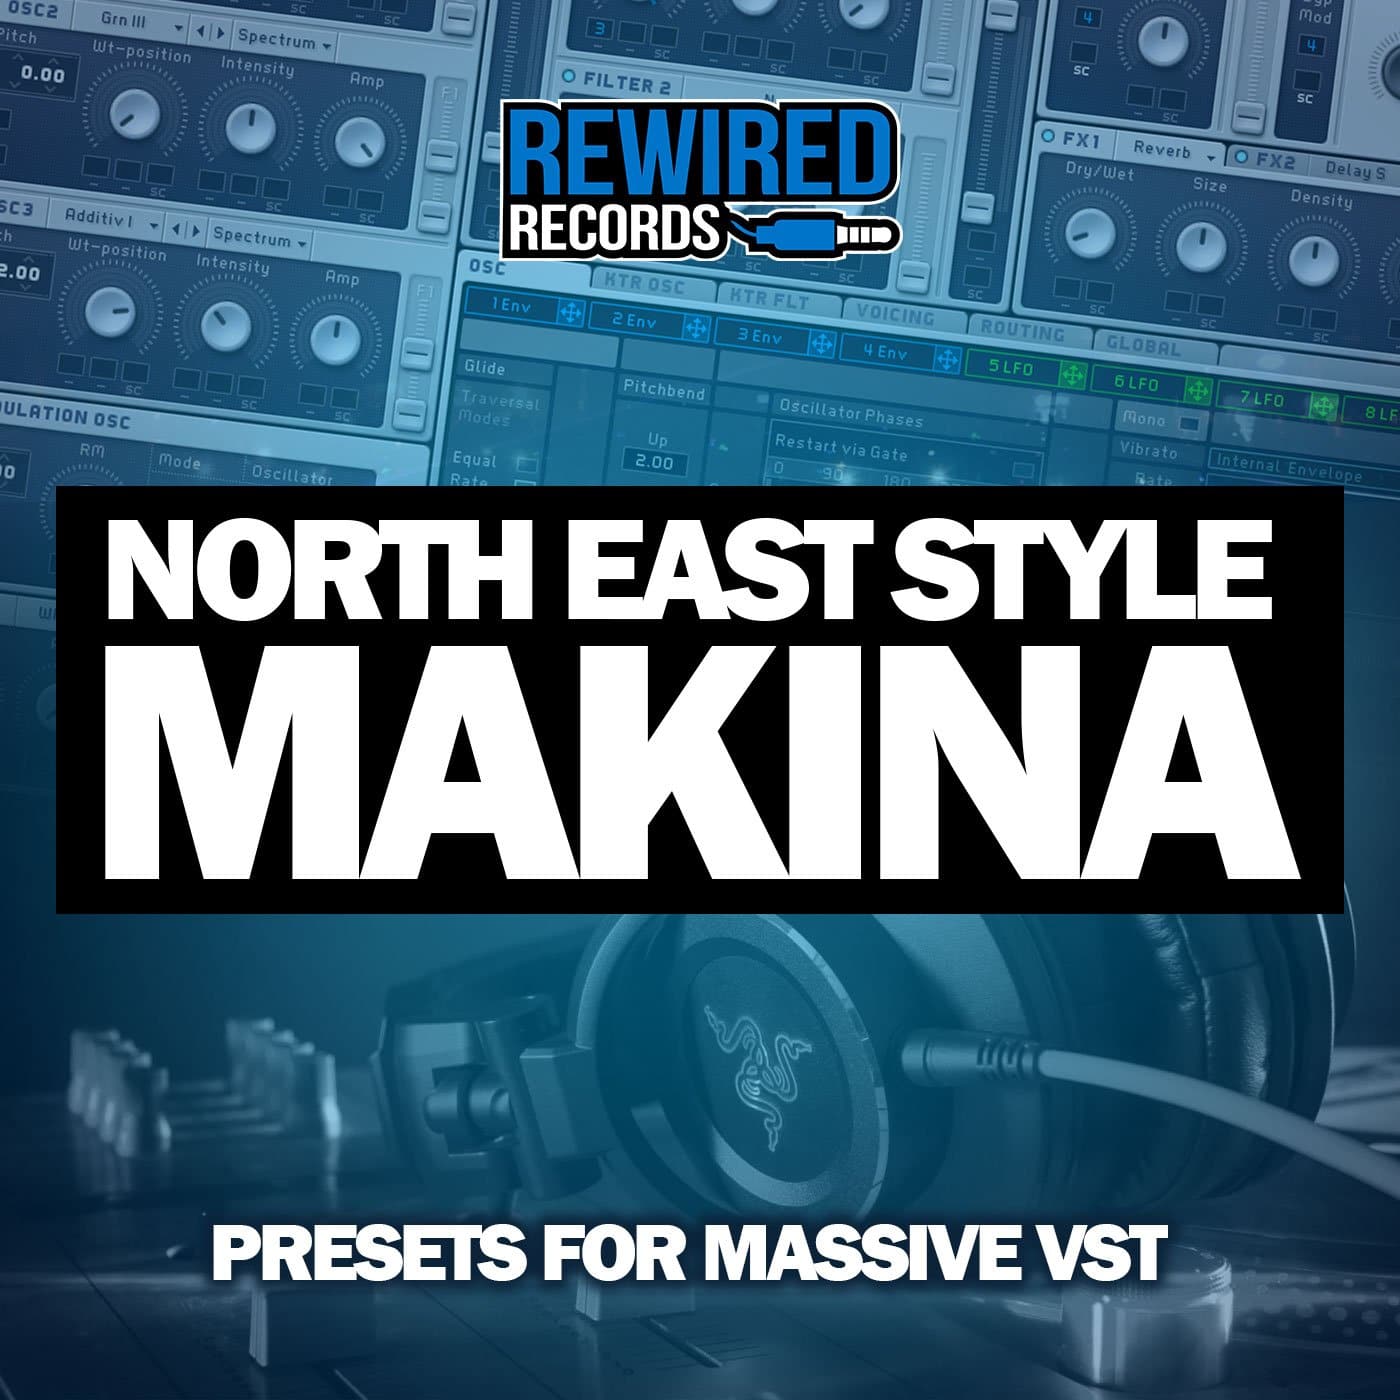 North East Style Makina | Presets For Massive VST - Rewired Records